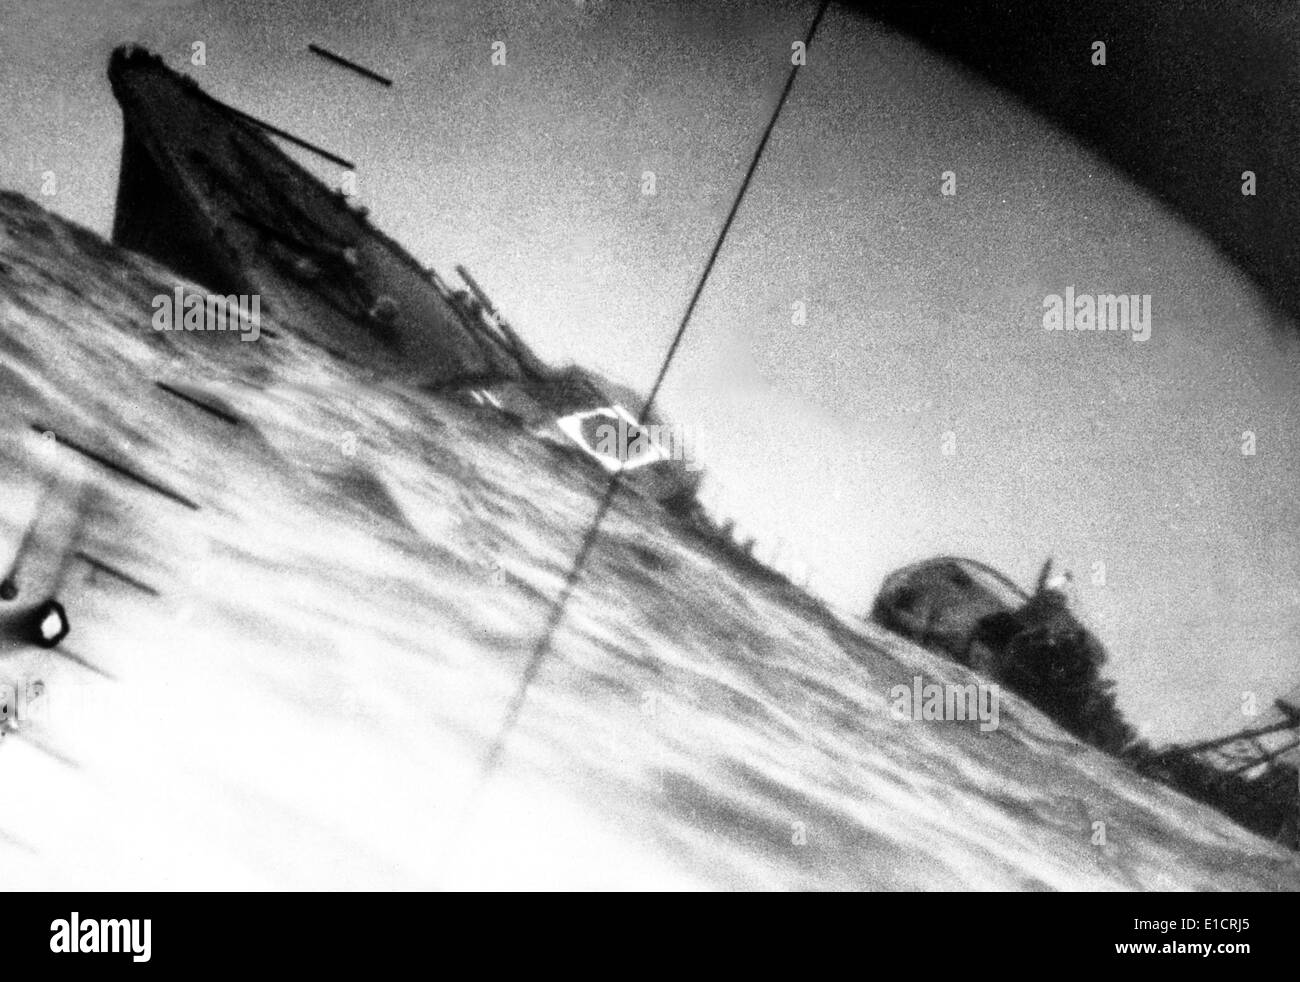 Torpedoed Japanese destroyer seen through periscope of USS Wahoo or USS Nautilus during World War 2. June 1942. Stock Photo